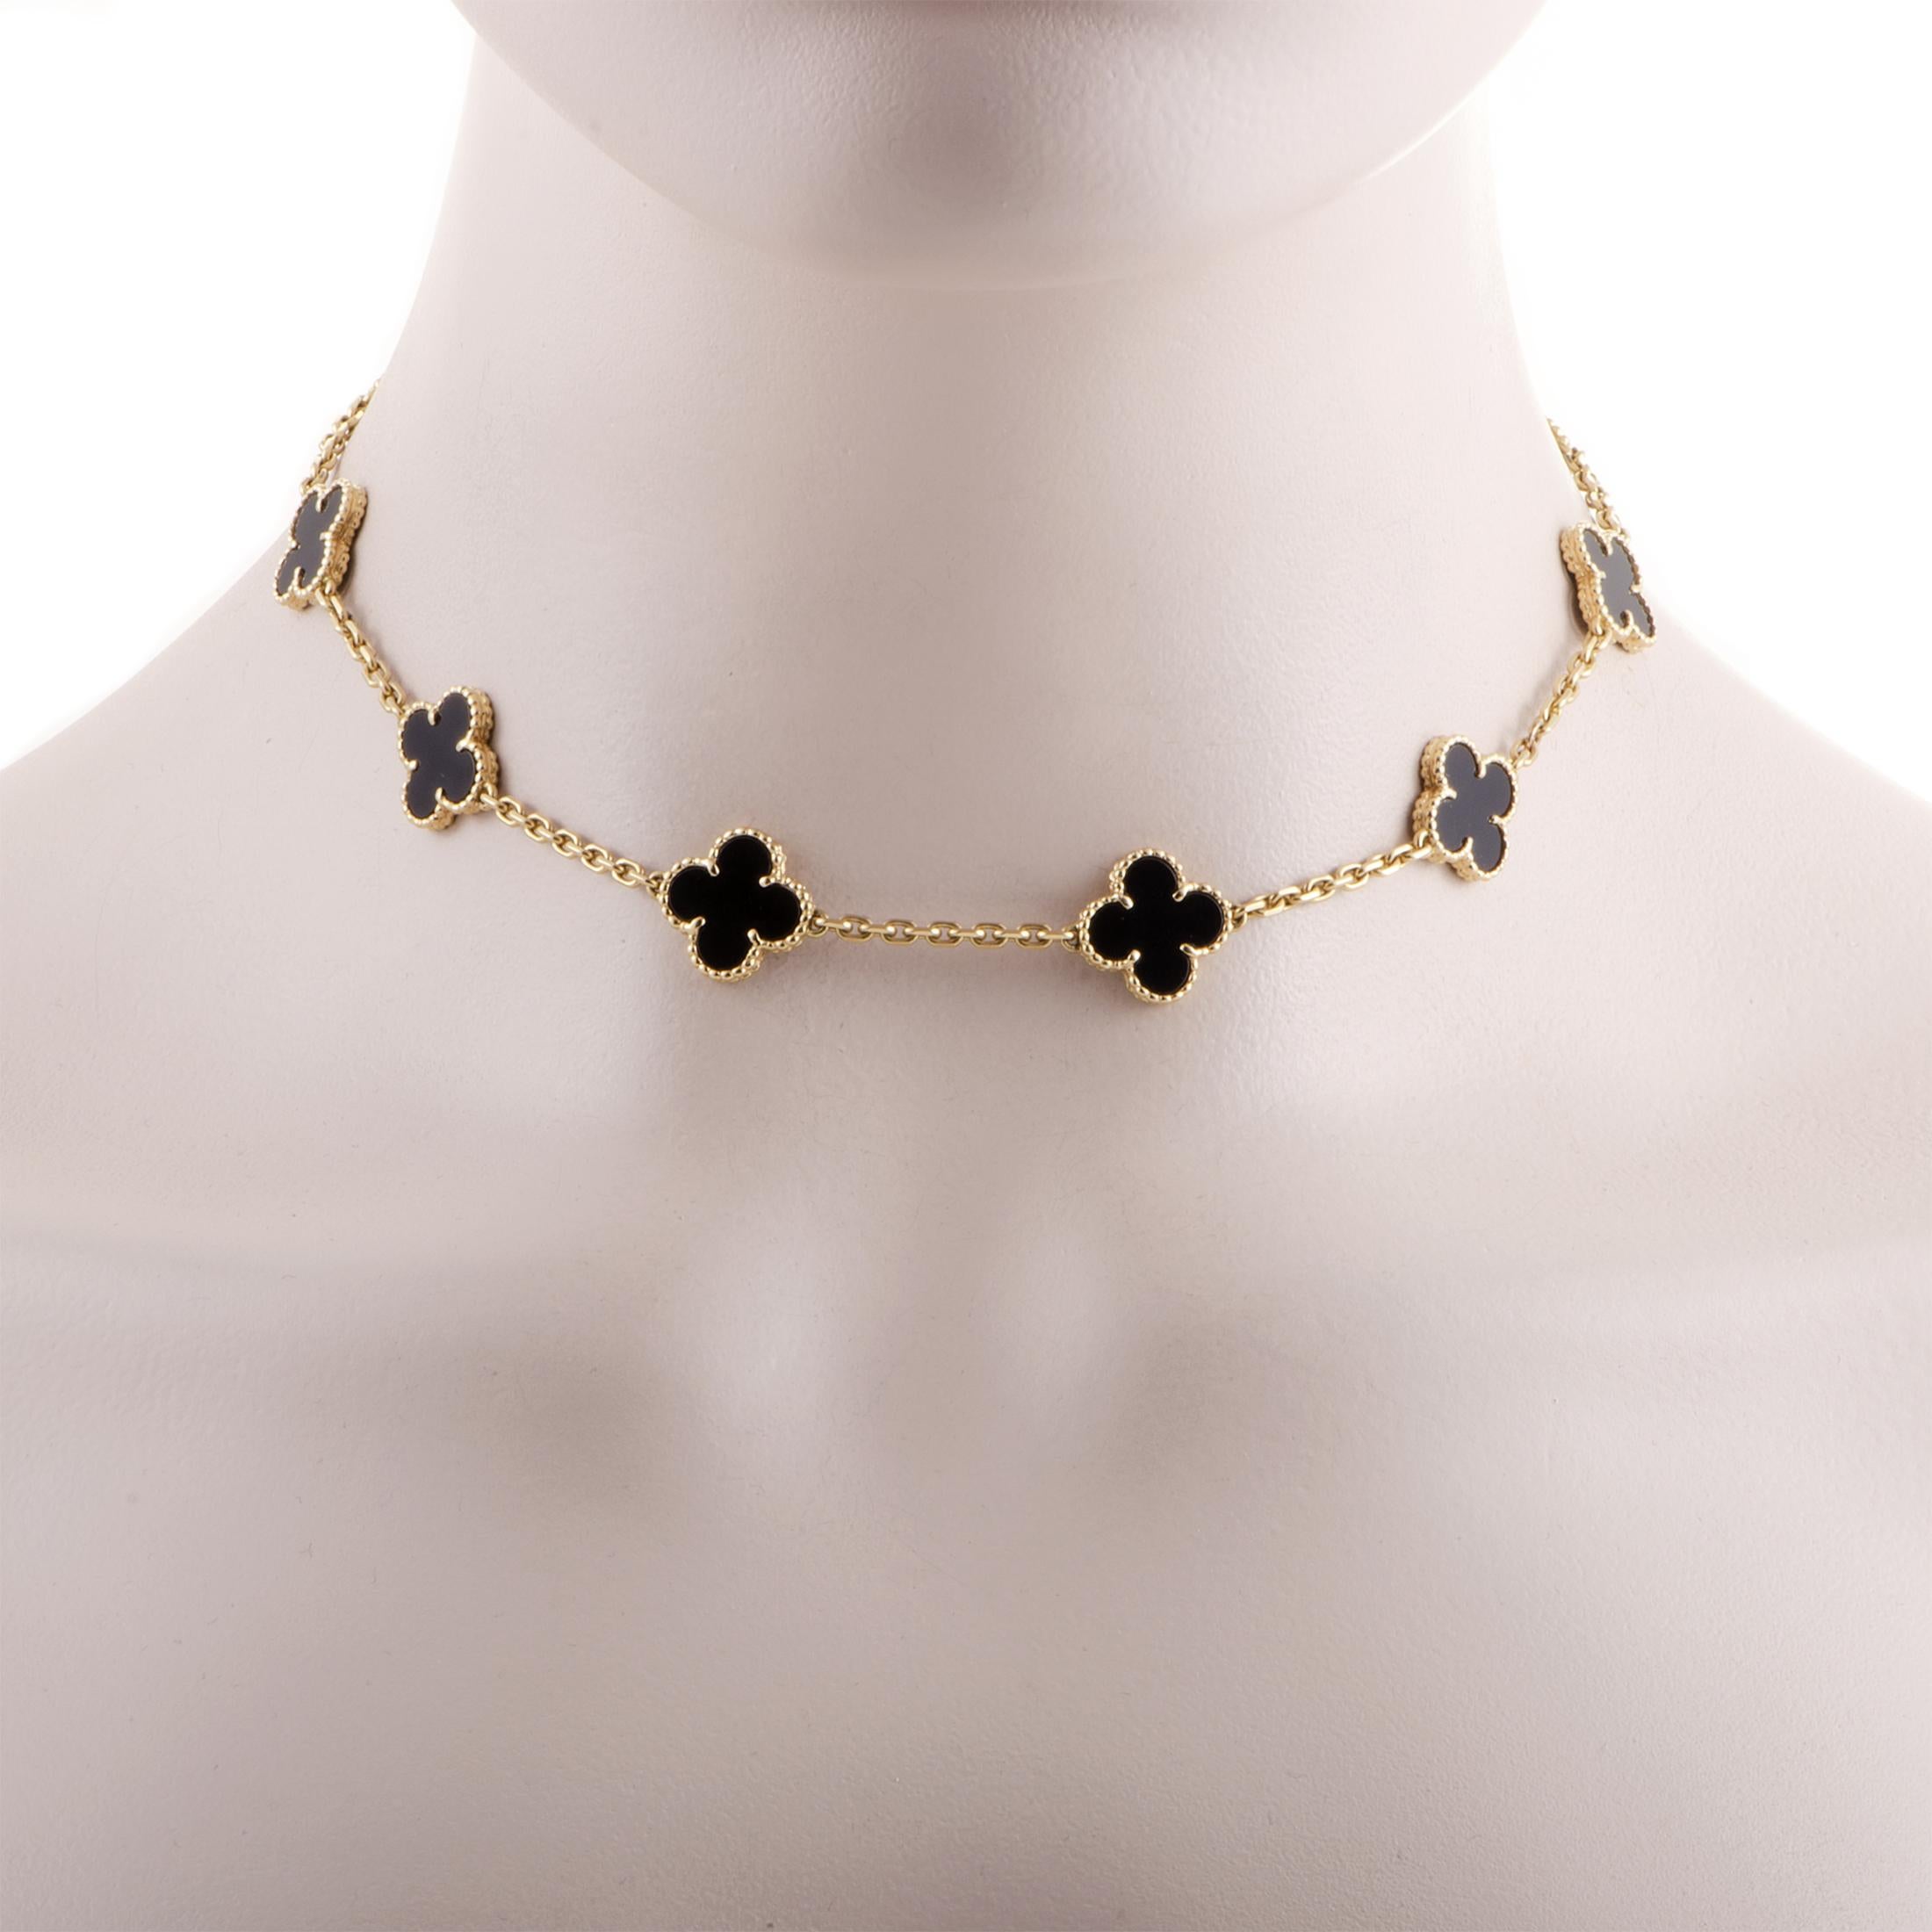 The minimalistic and irresistible motif which makes the esteemed Alhambra collection instantly recognizable and highly revered is employed in this enchanting 18K yellow gold necklace from Van Cleef & Arpels that also boasts captivating onyx stones.